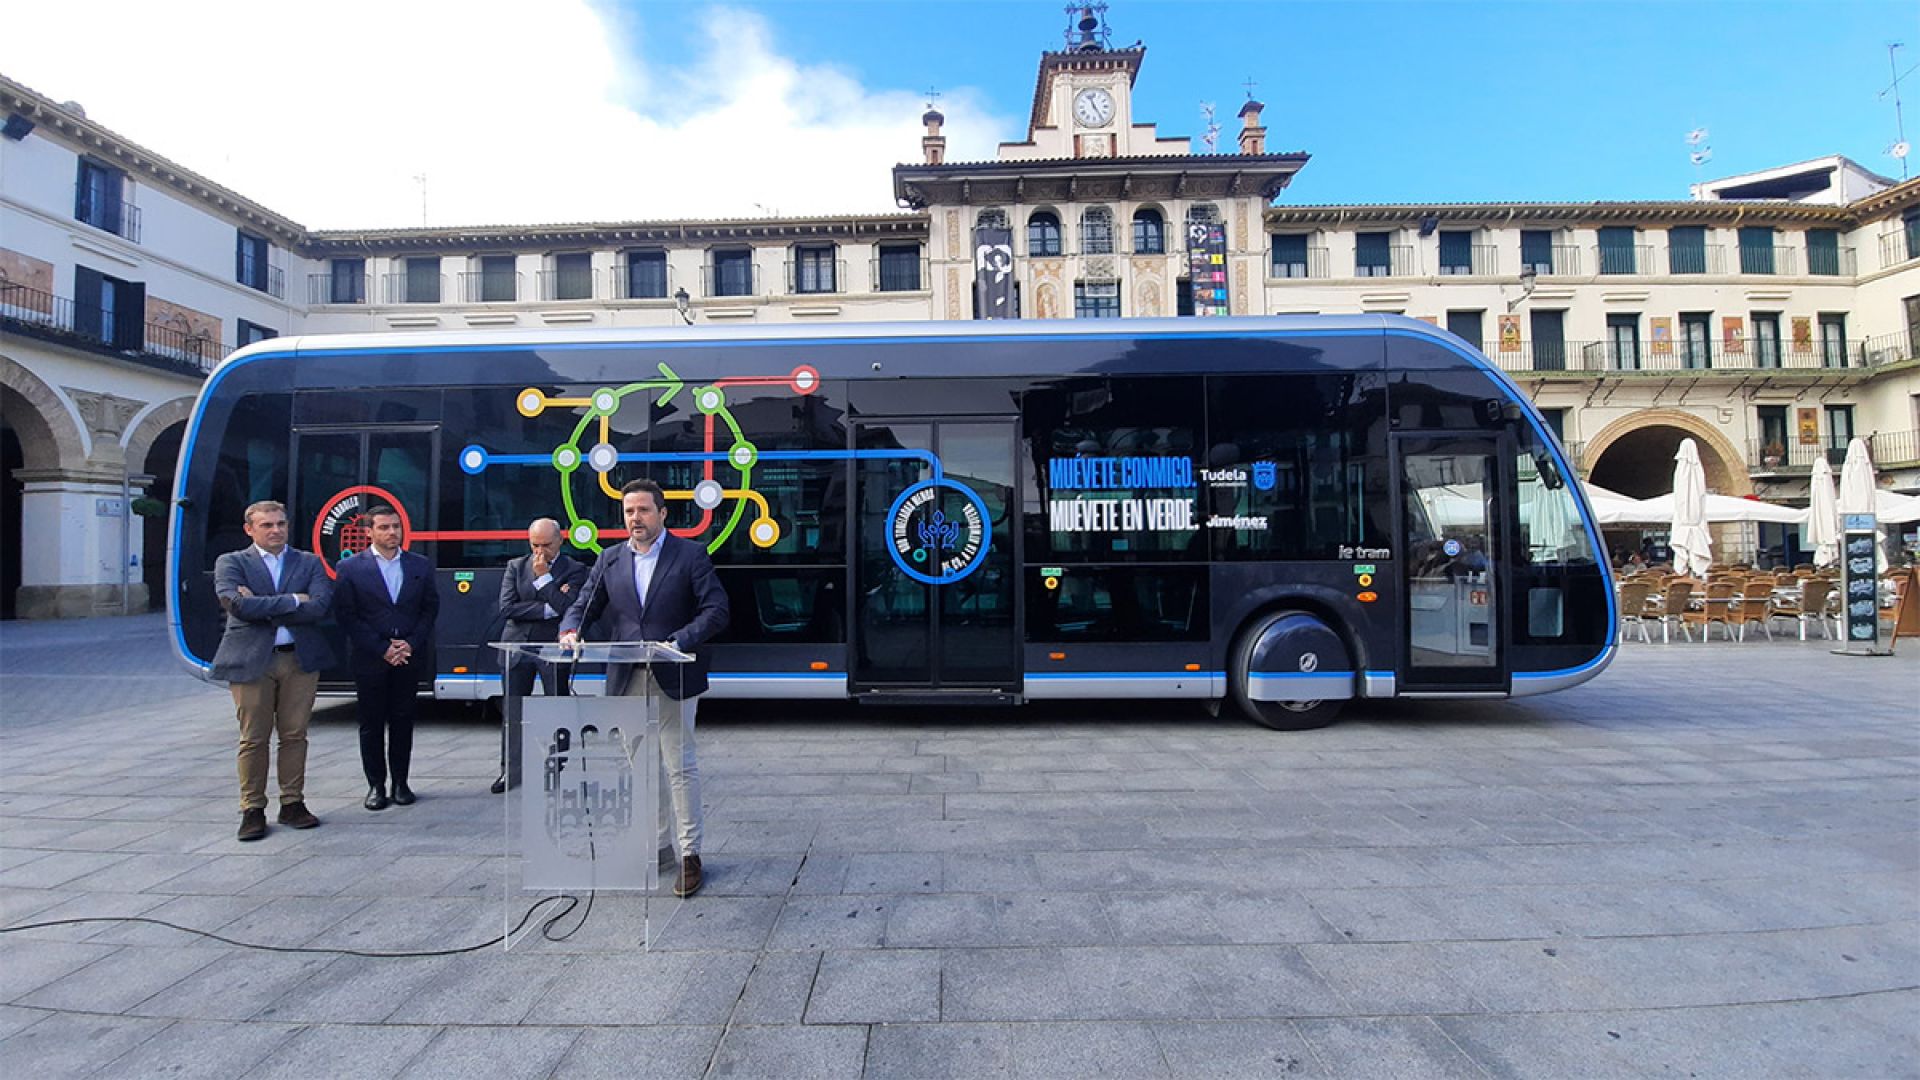 Tudela chooses electric buses from Irizar e-mobility